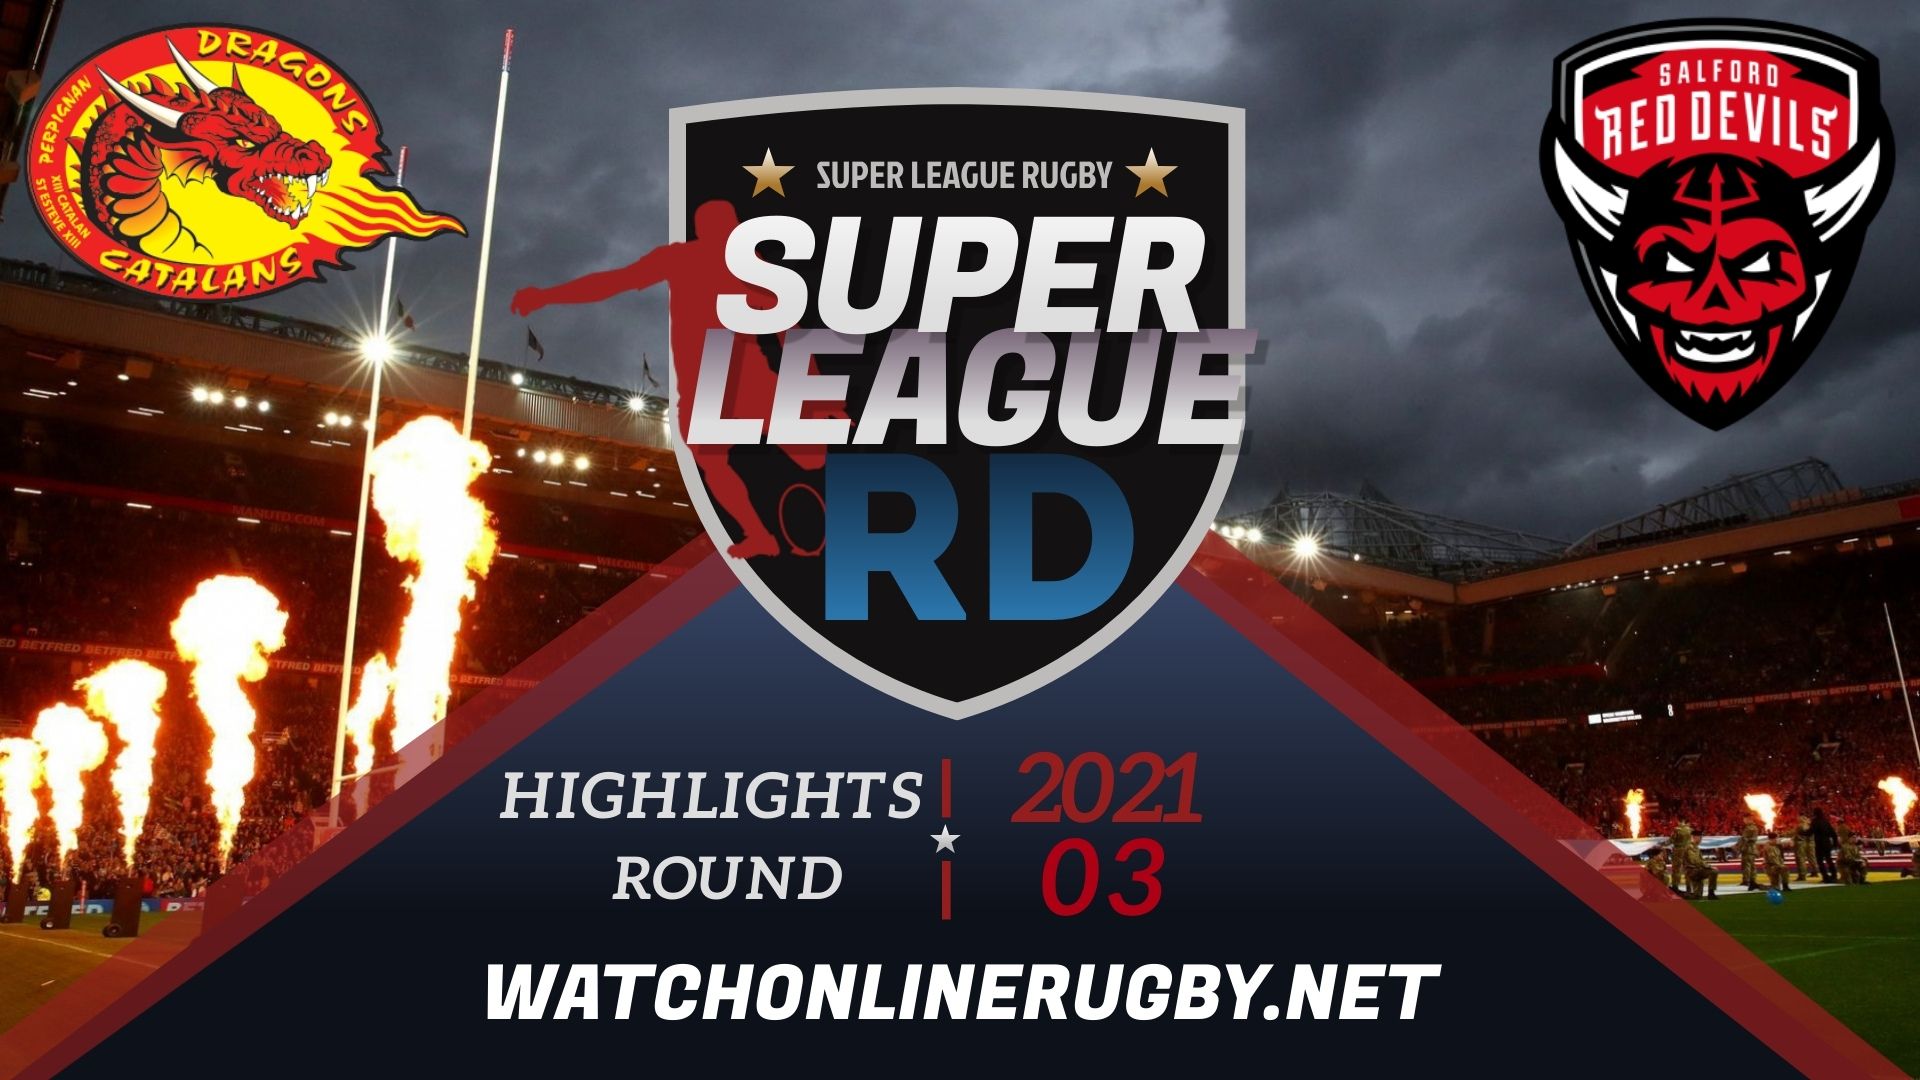 Catalans Dragons Vs Red Devils Super League Rugby 2021 RD 3